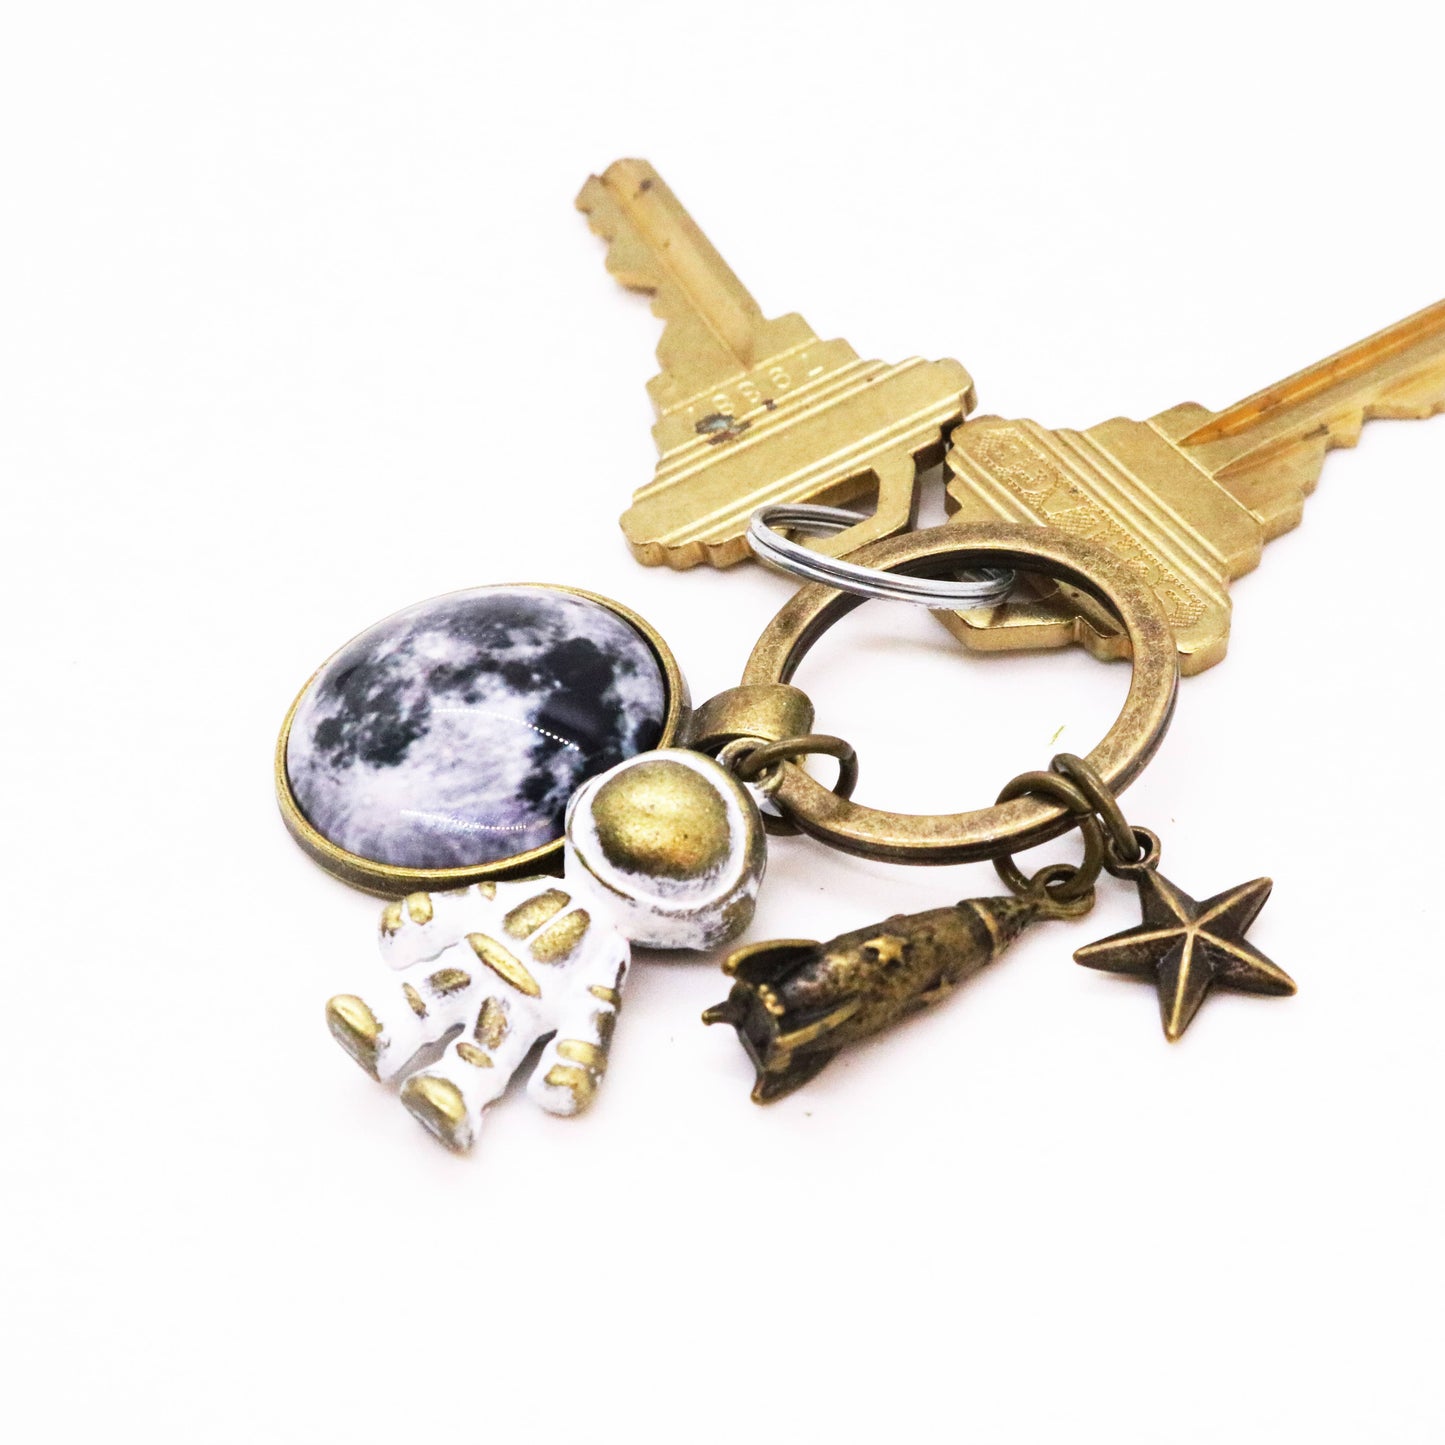 To The Moon And Back - Keychain